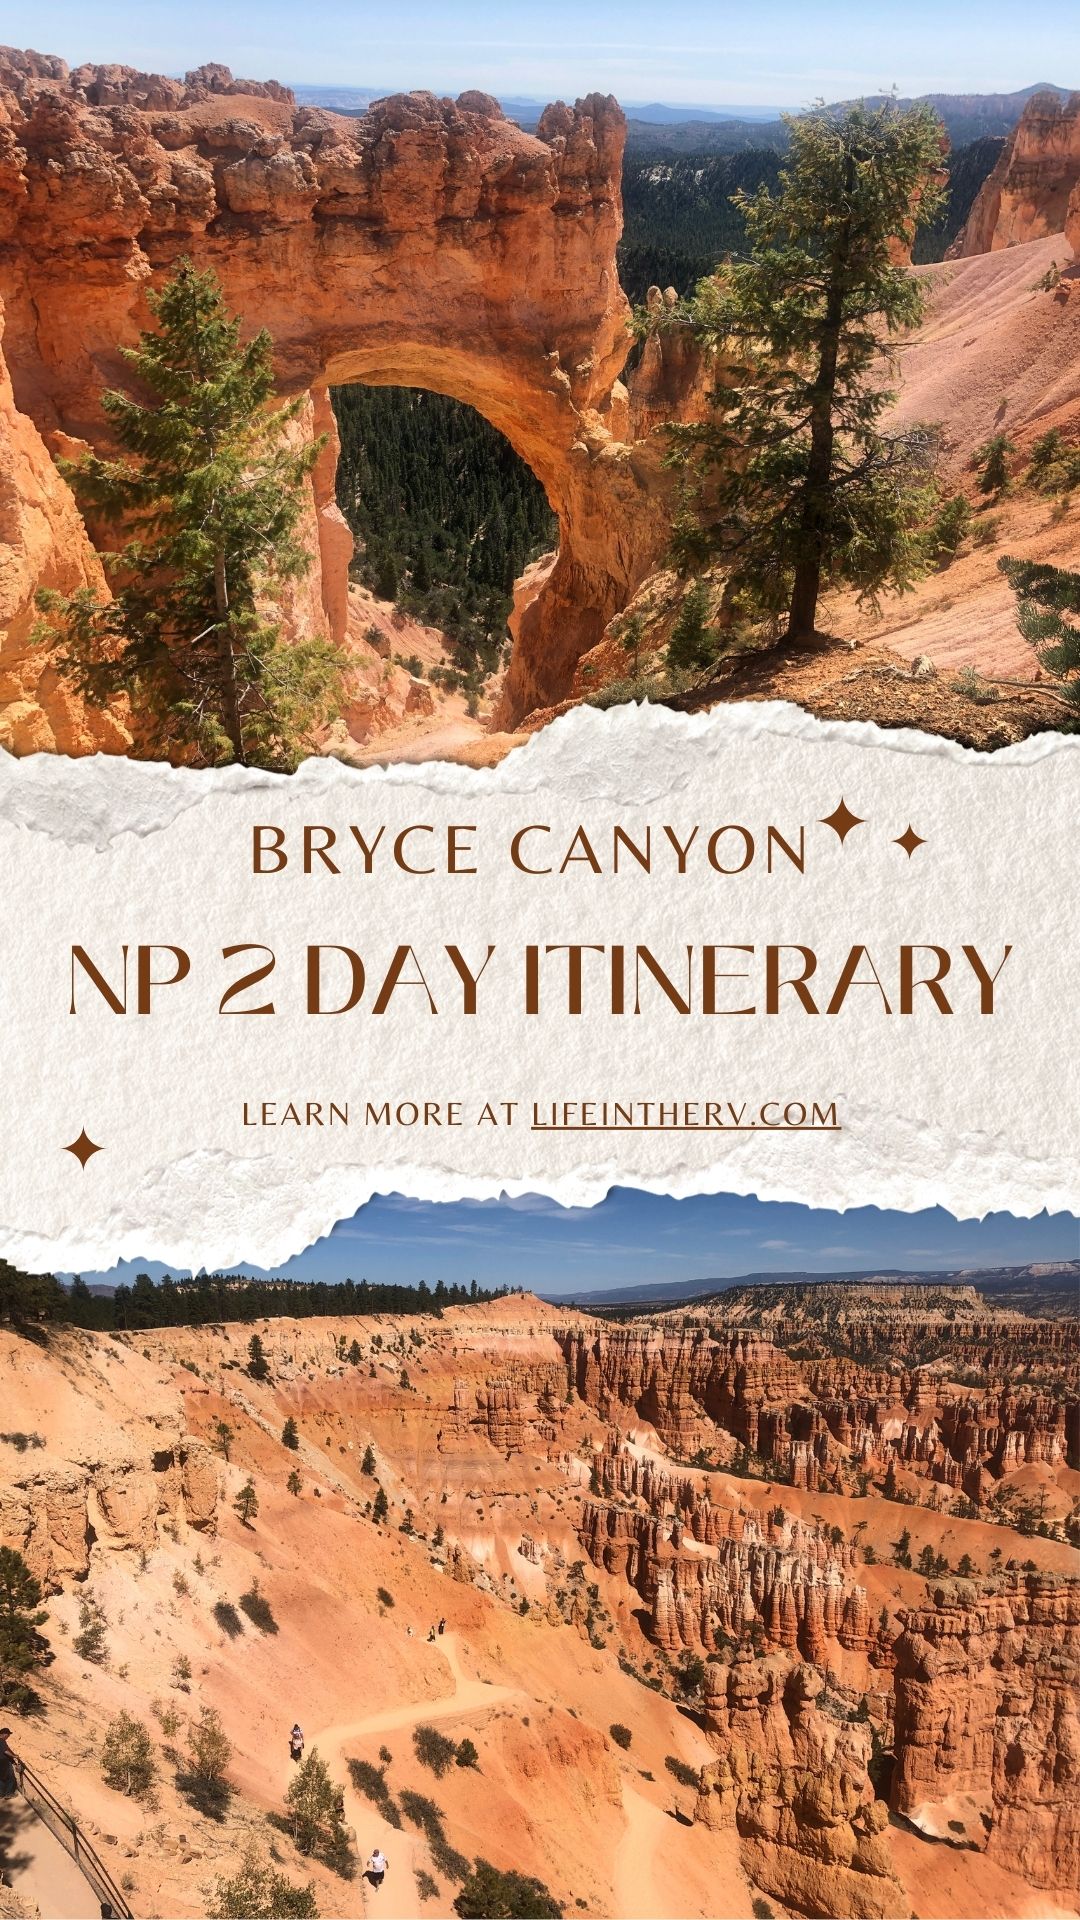 Bryce Canyon National Park is a stunning destination that offers a wide array of outdoor activities and breathtaking views. If you're planning a trip to Bryce Canyon, here's a helpful two-day itinerary to